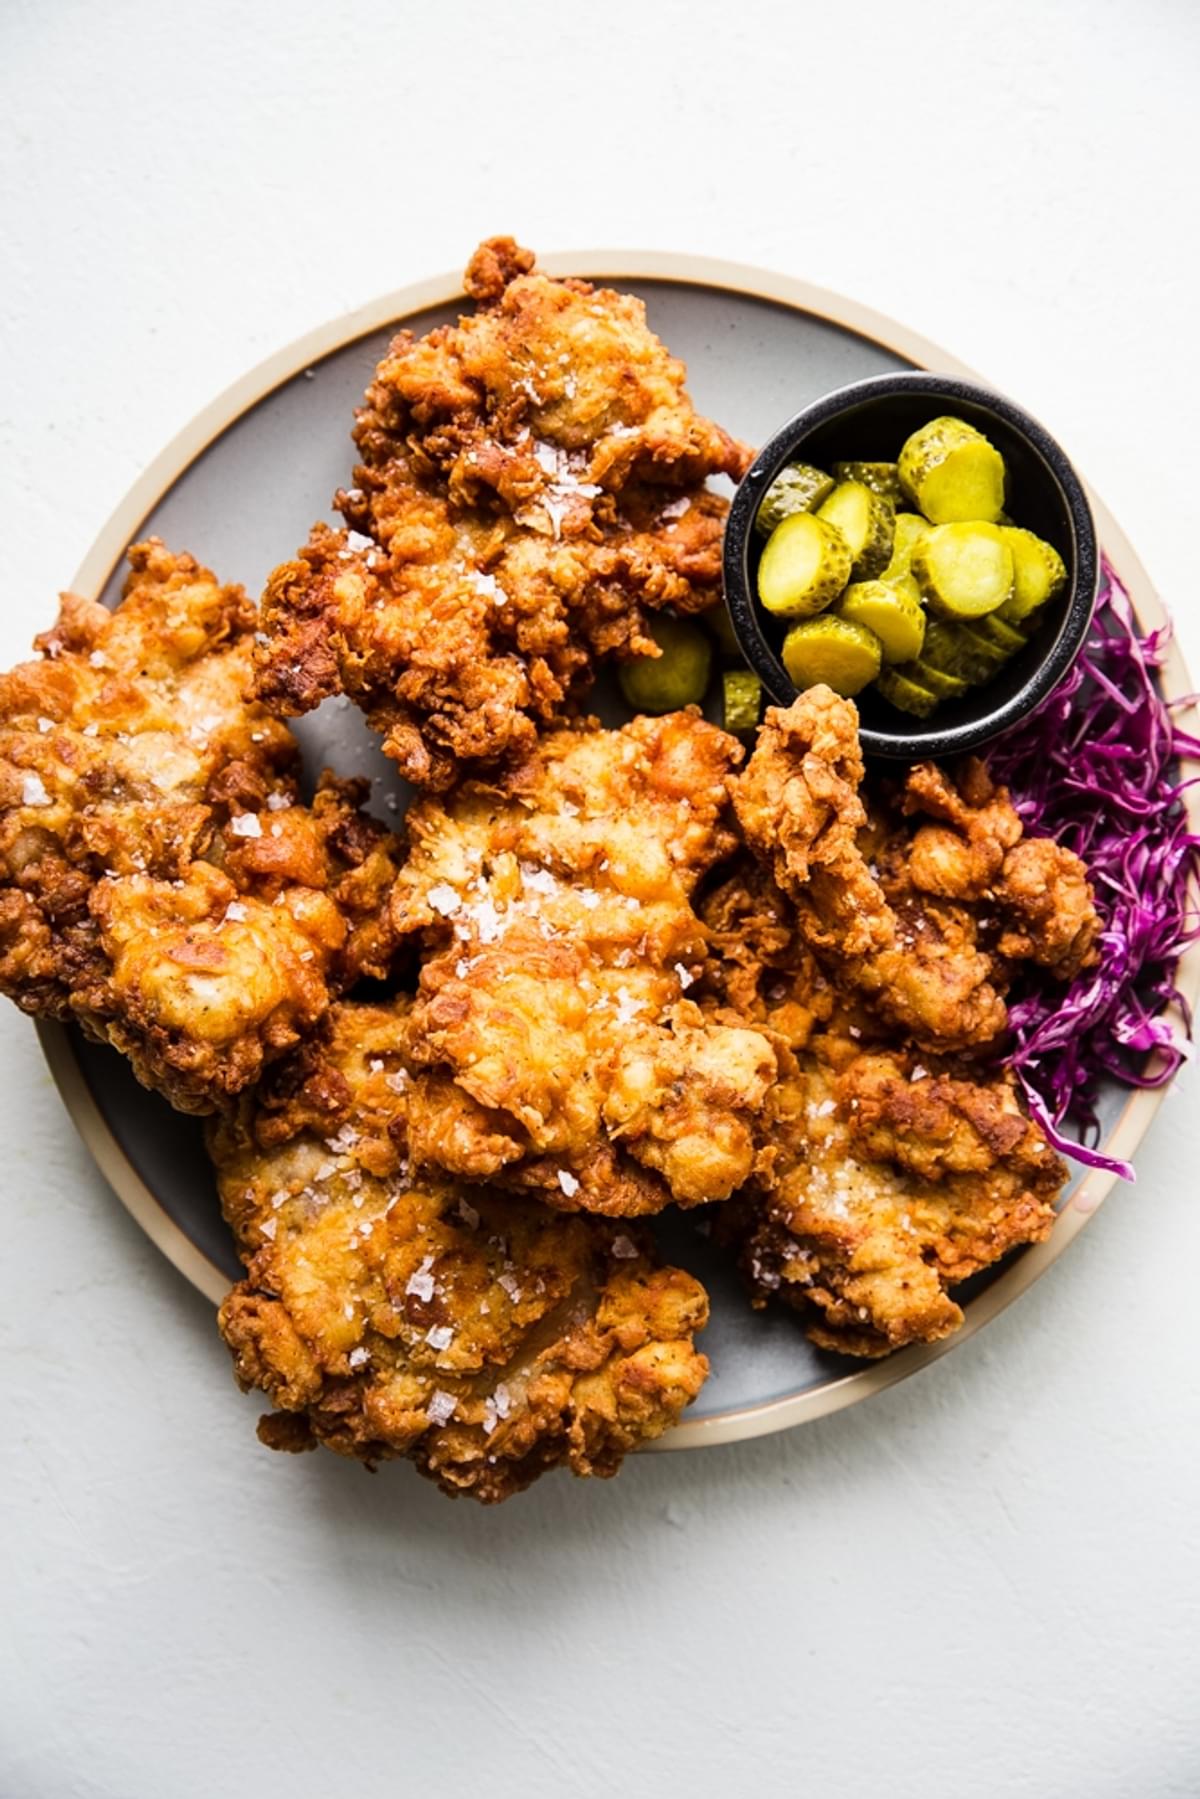 Perfectly crispy fried chicken thighs show on a plate along with a small bowl of pickles and pickled red cabbage.